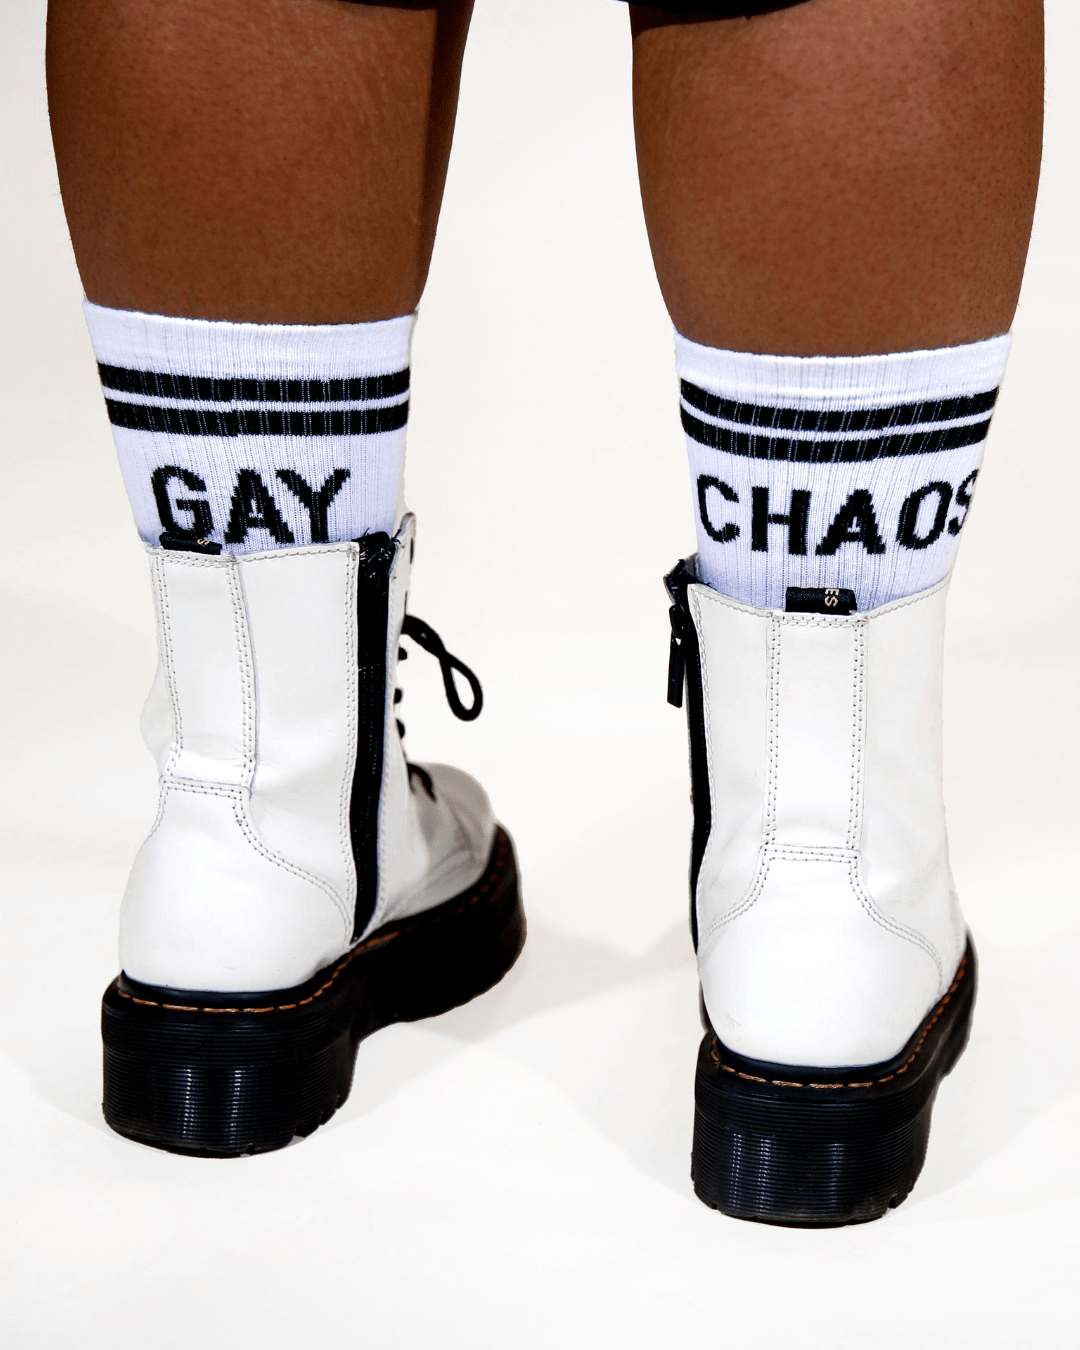 The GAY CHAOS Socks are white with black bands at the cuff. The socks have black text that say "GAY" on the back left cuff and "CHAOS" on the back right cuff. The style is ribbed cotton crew with compression and cushion. There is also black heel and toe color.